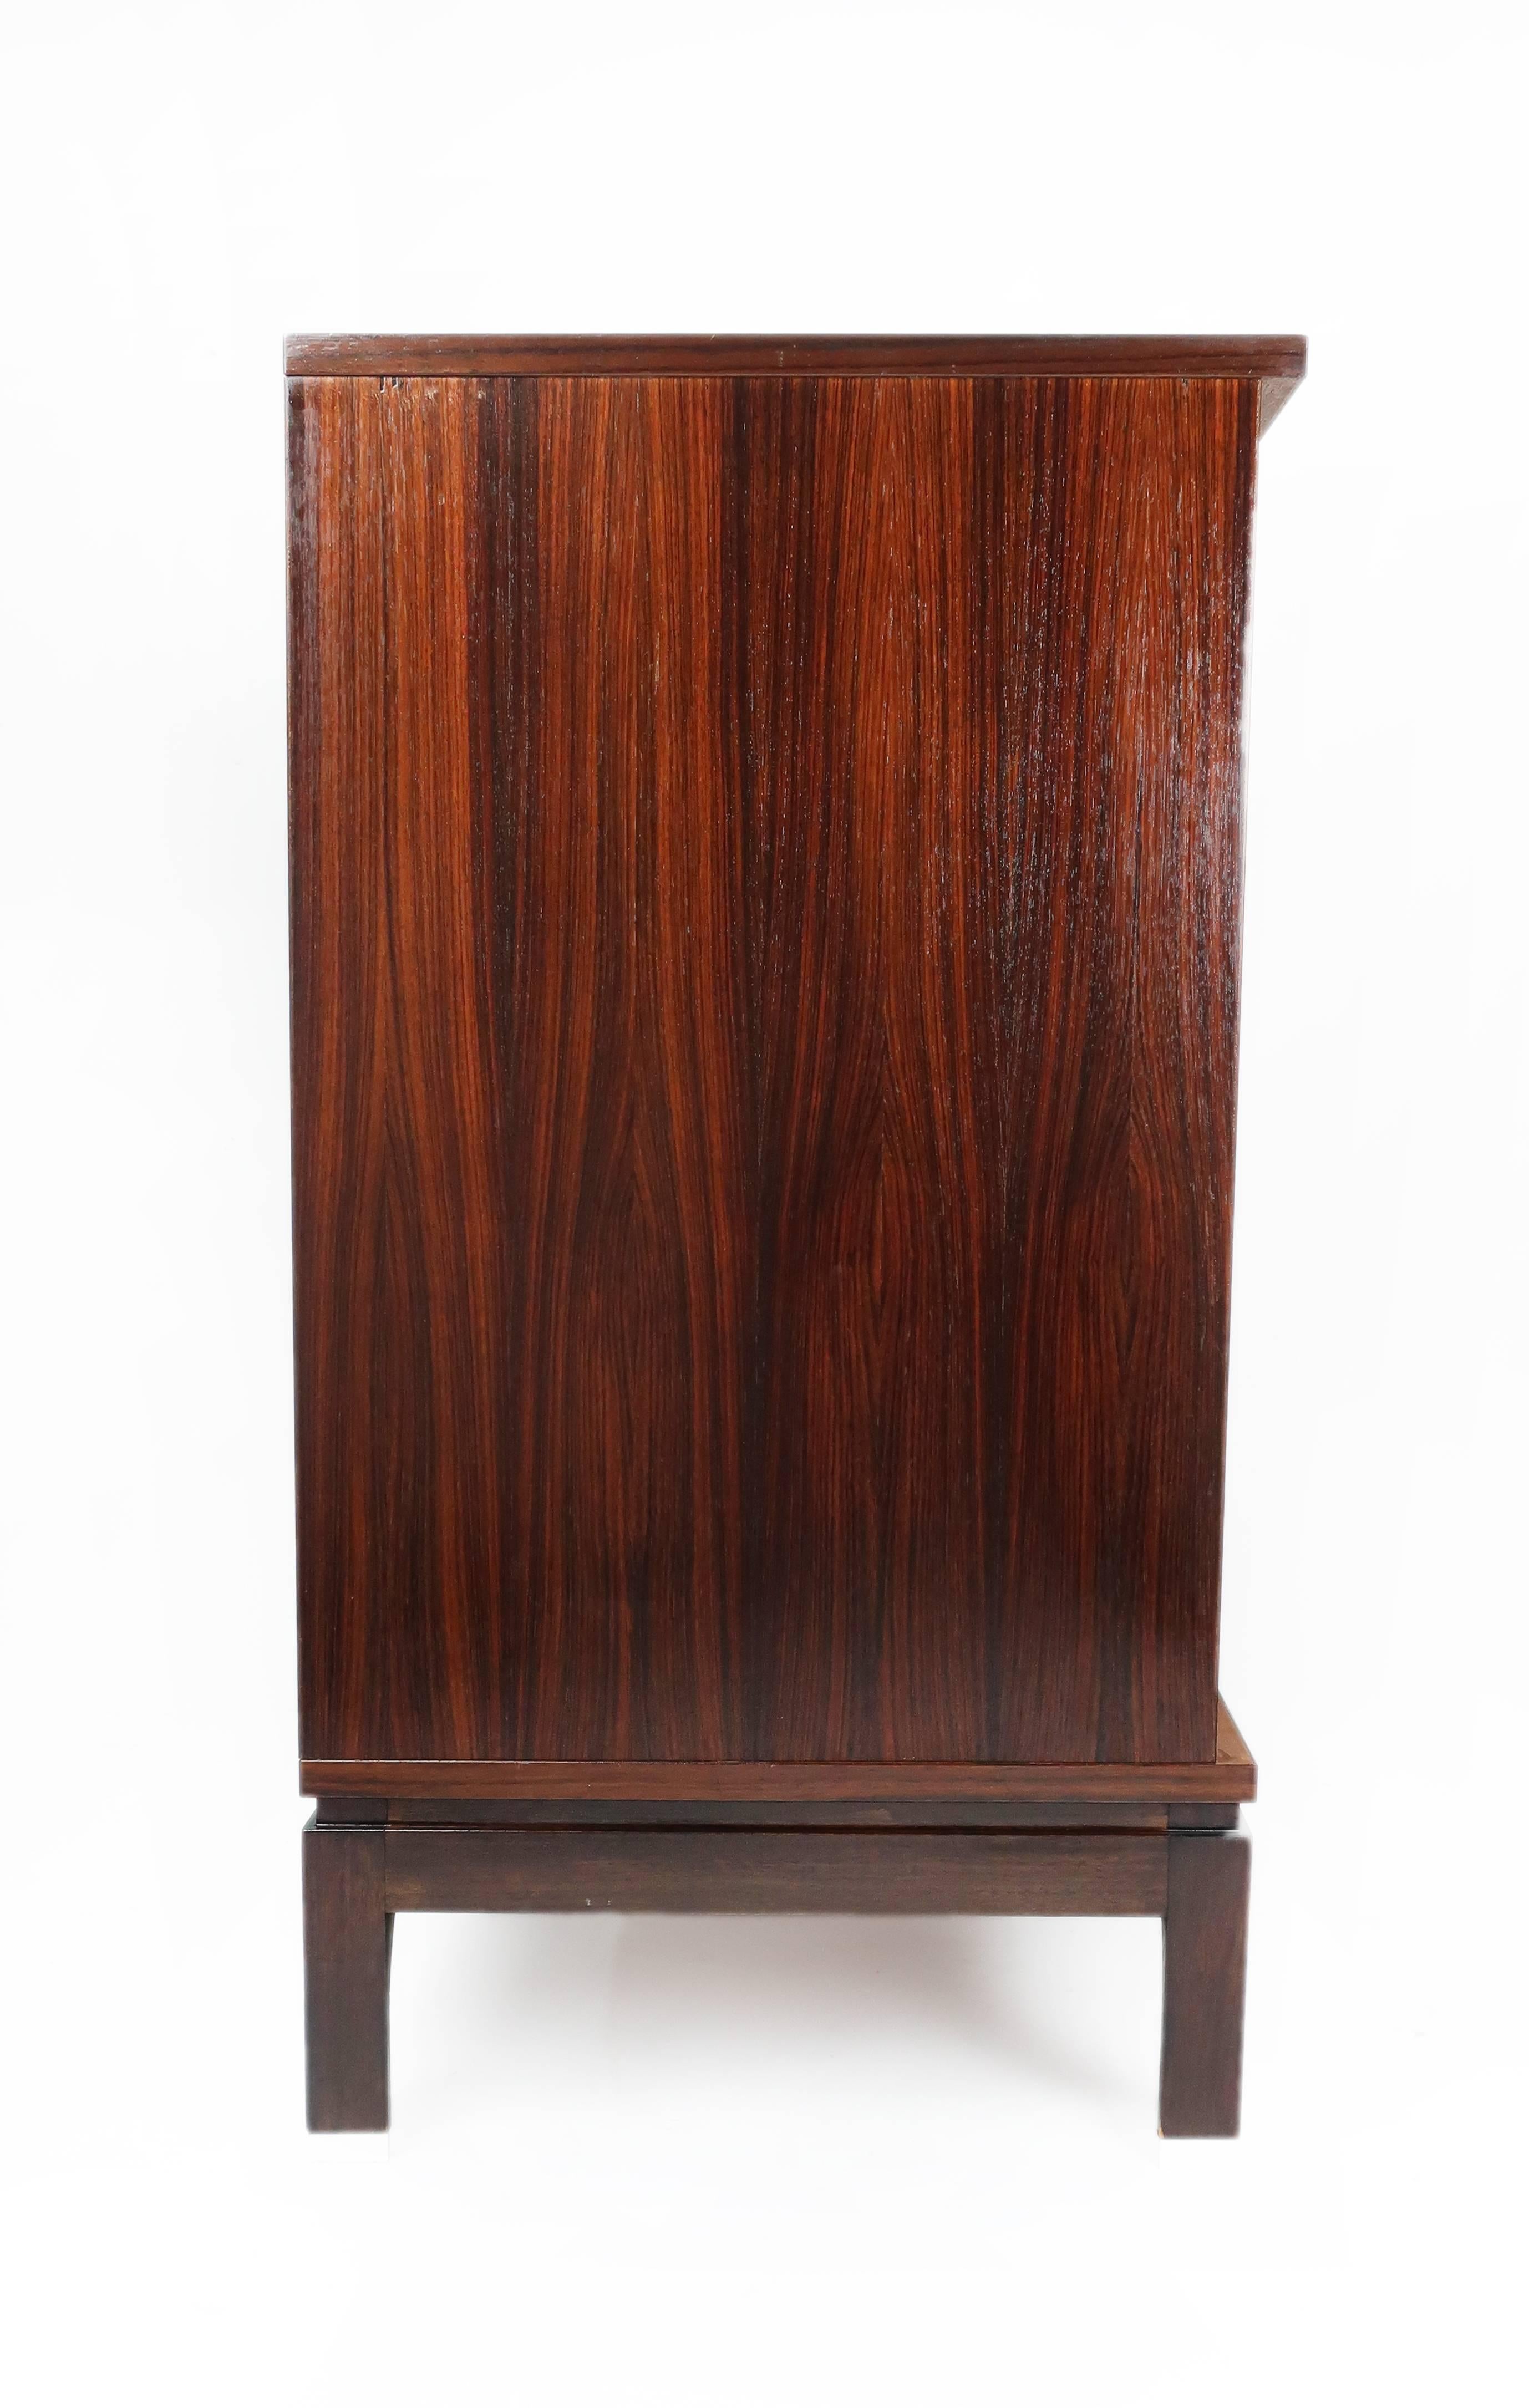 20th Century Italian Rosewood Bachelors Chest of Drawers by M.I.M., circa 1960